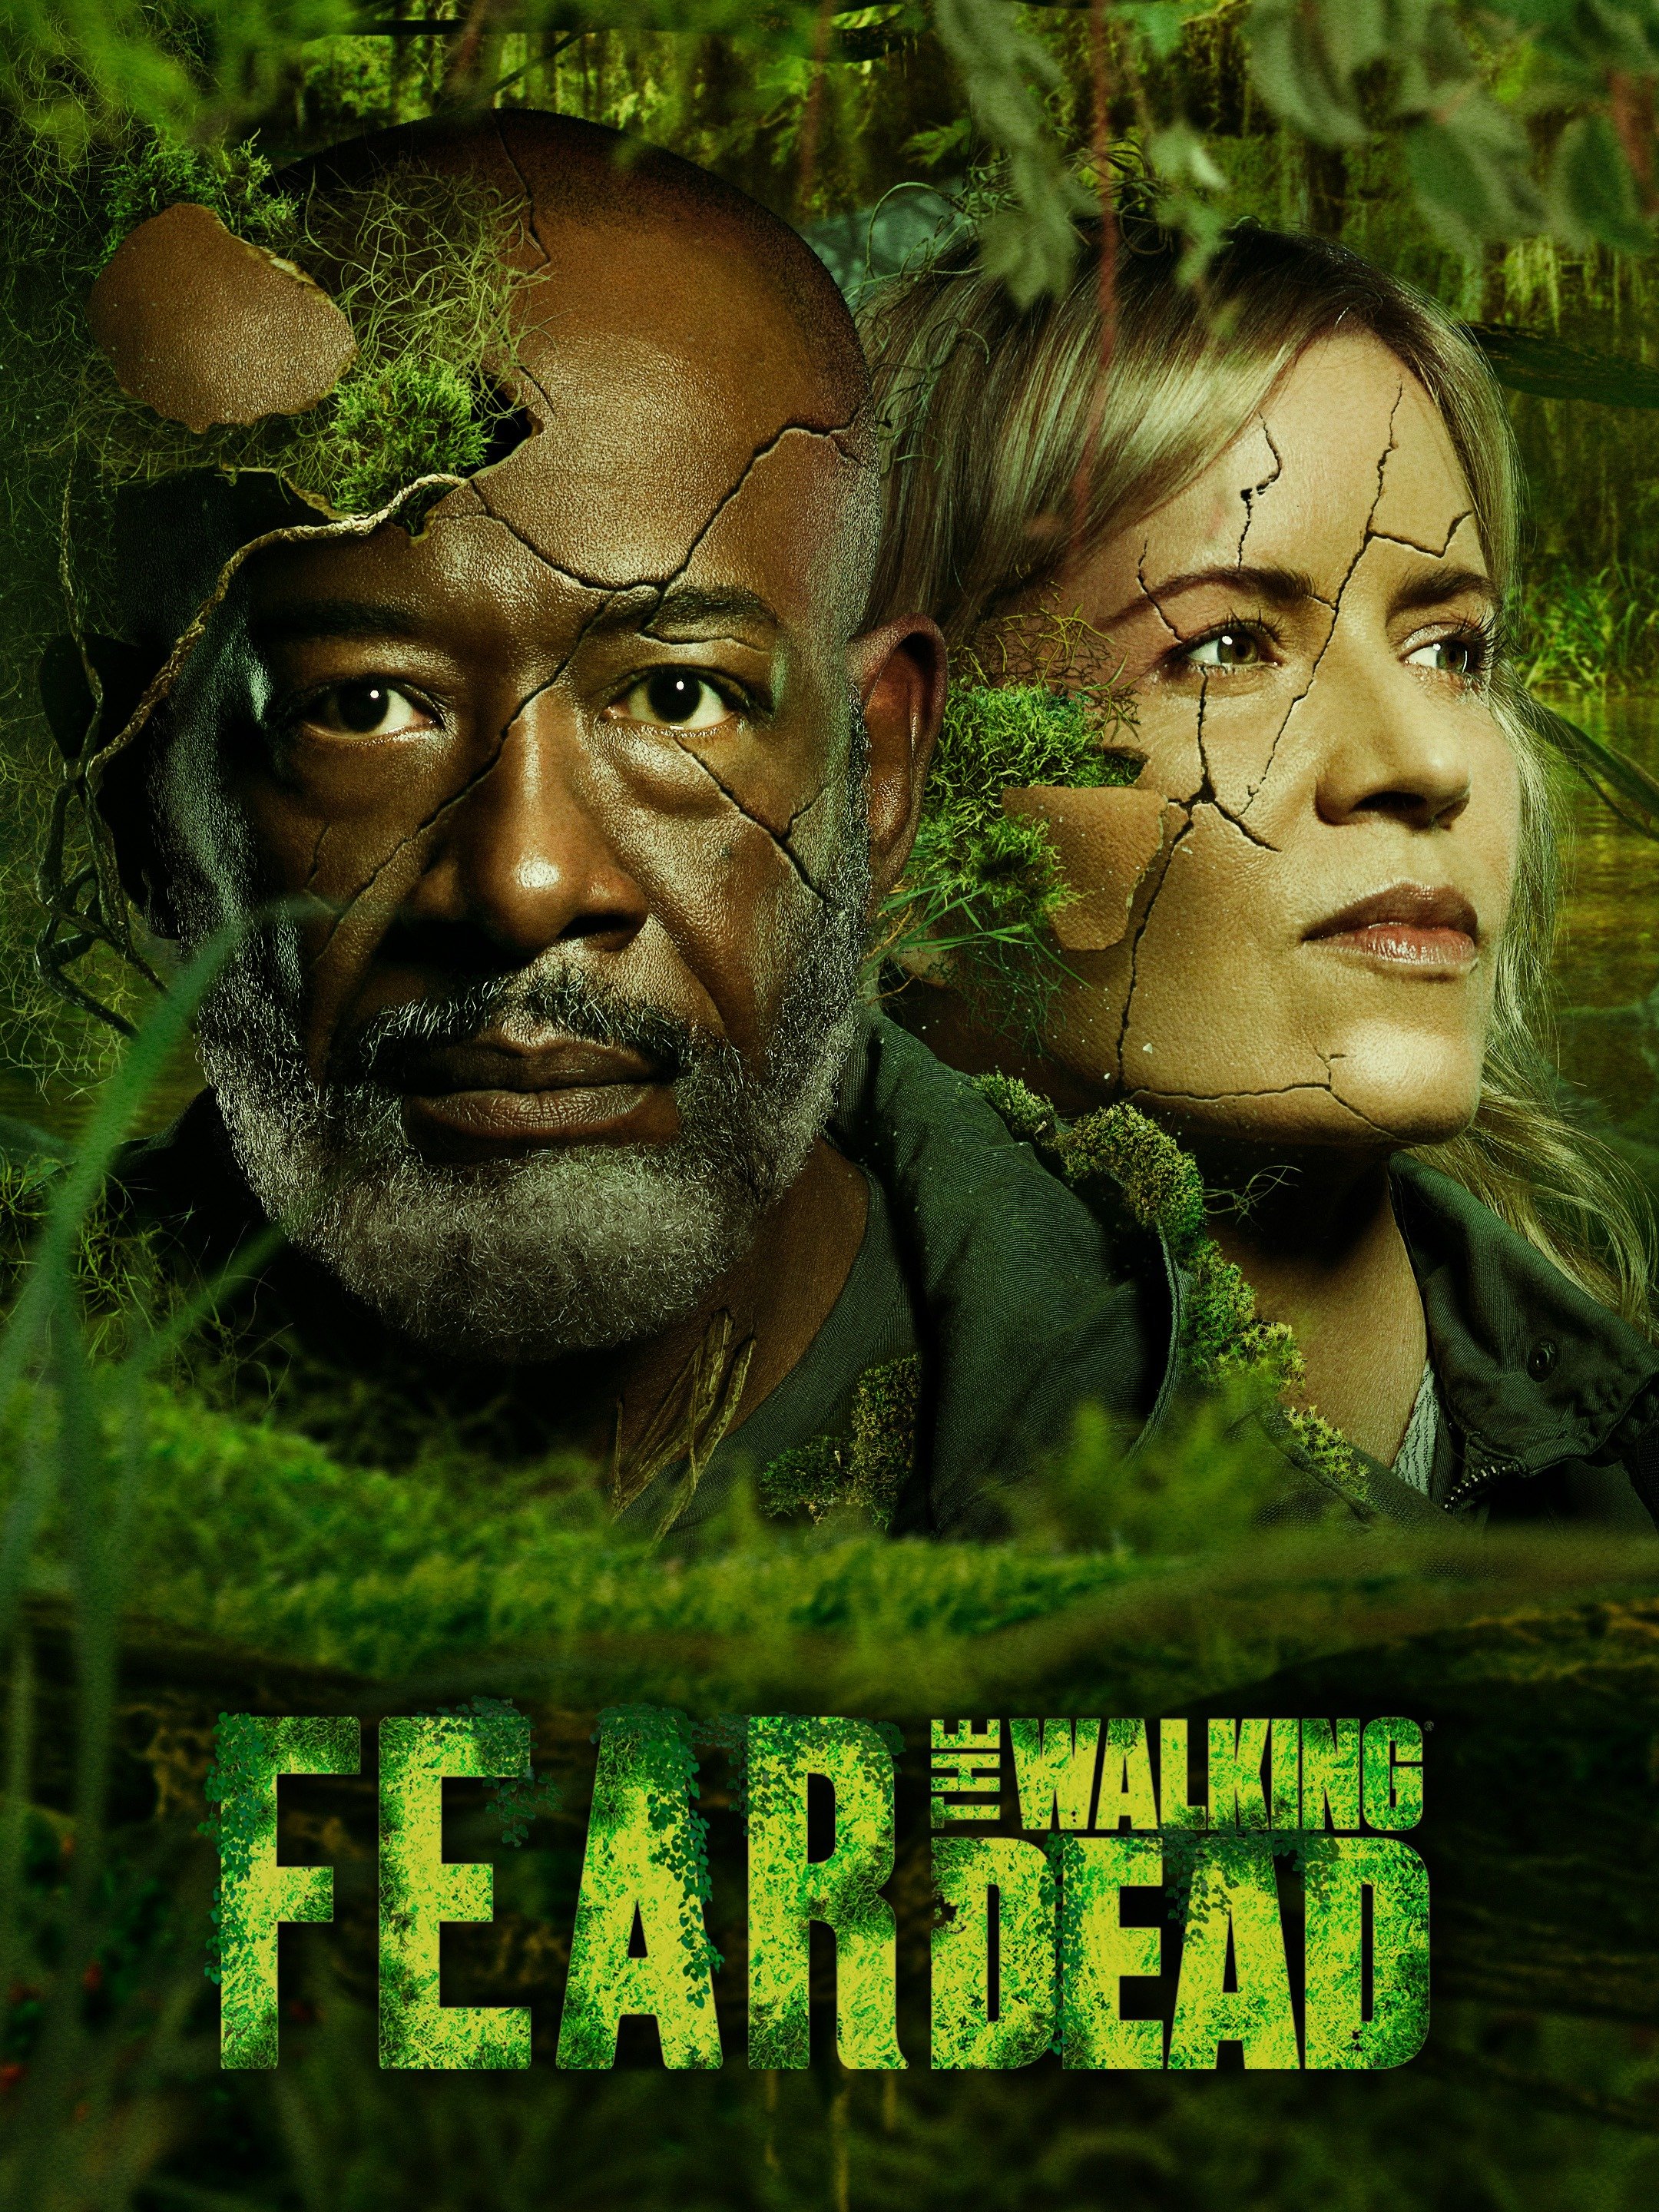 Reaktor champignon Forstå Fear the Walking Dead: Season 5 Episode 2 Clip - We Don't Have Time For  This - Trailers & Videos - Rotten Tomatoes